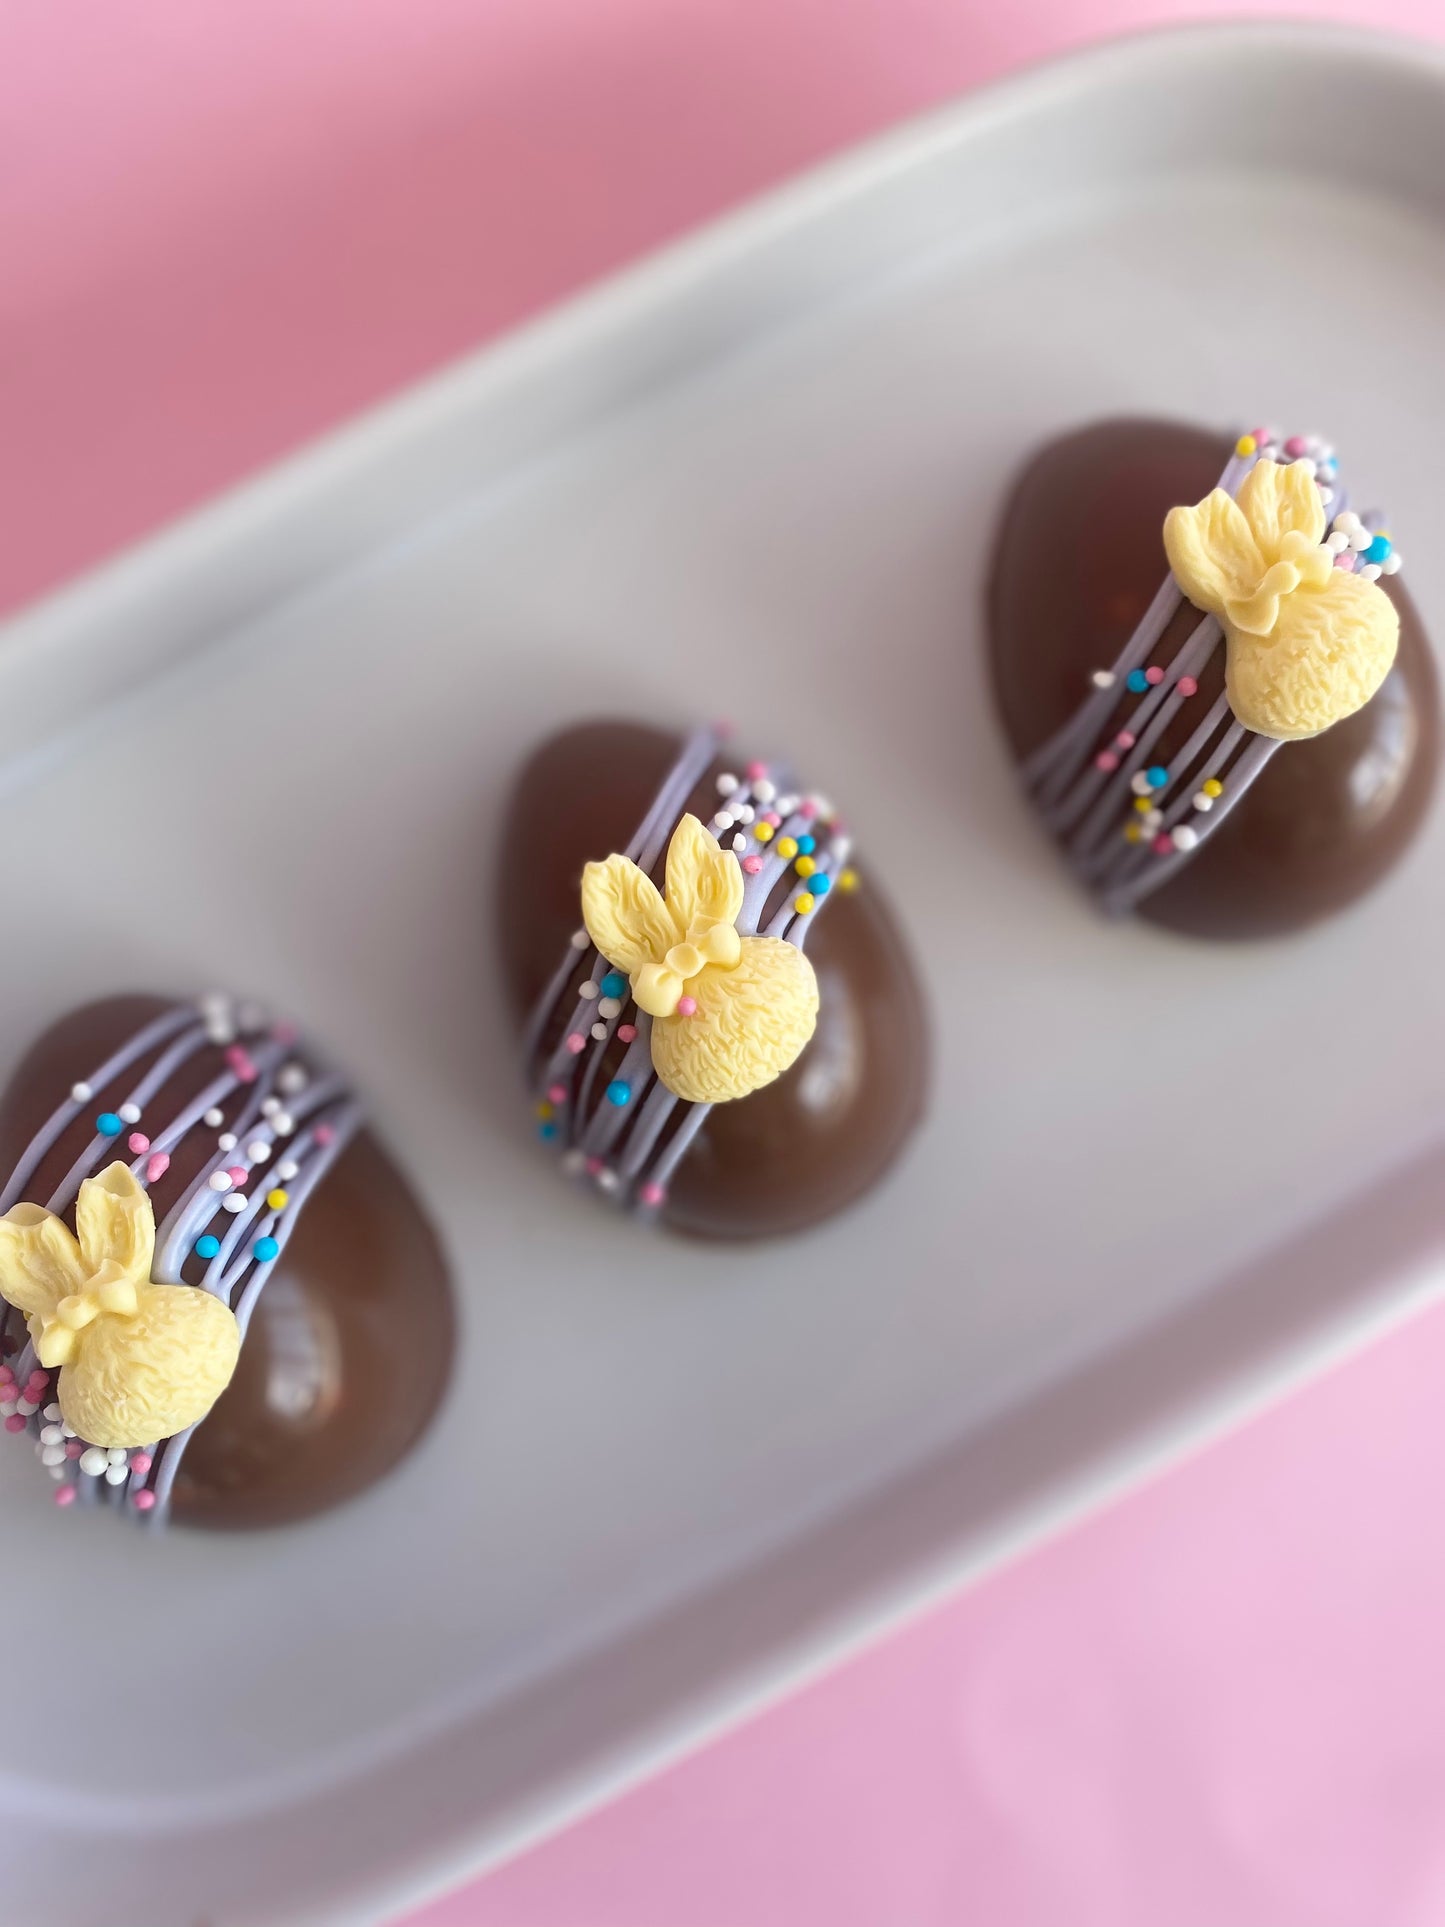 Easter Hot Chocolate Bombs